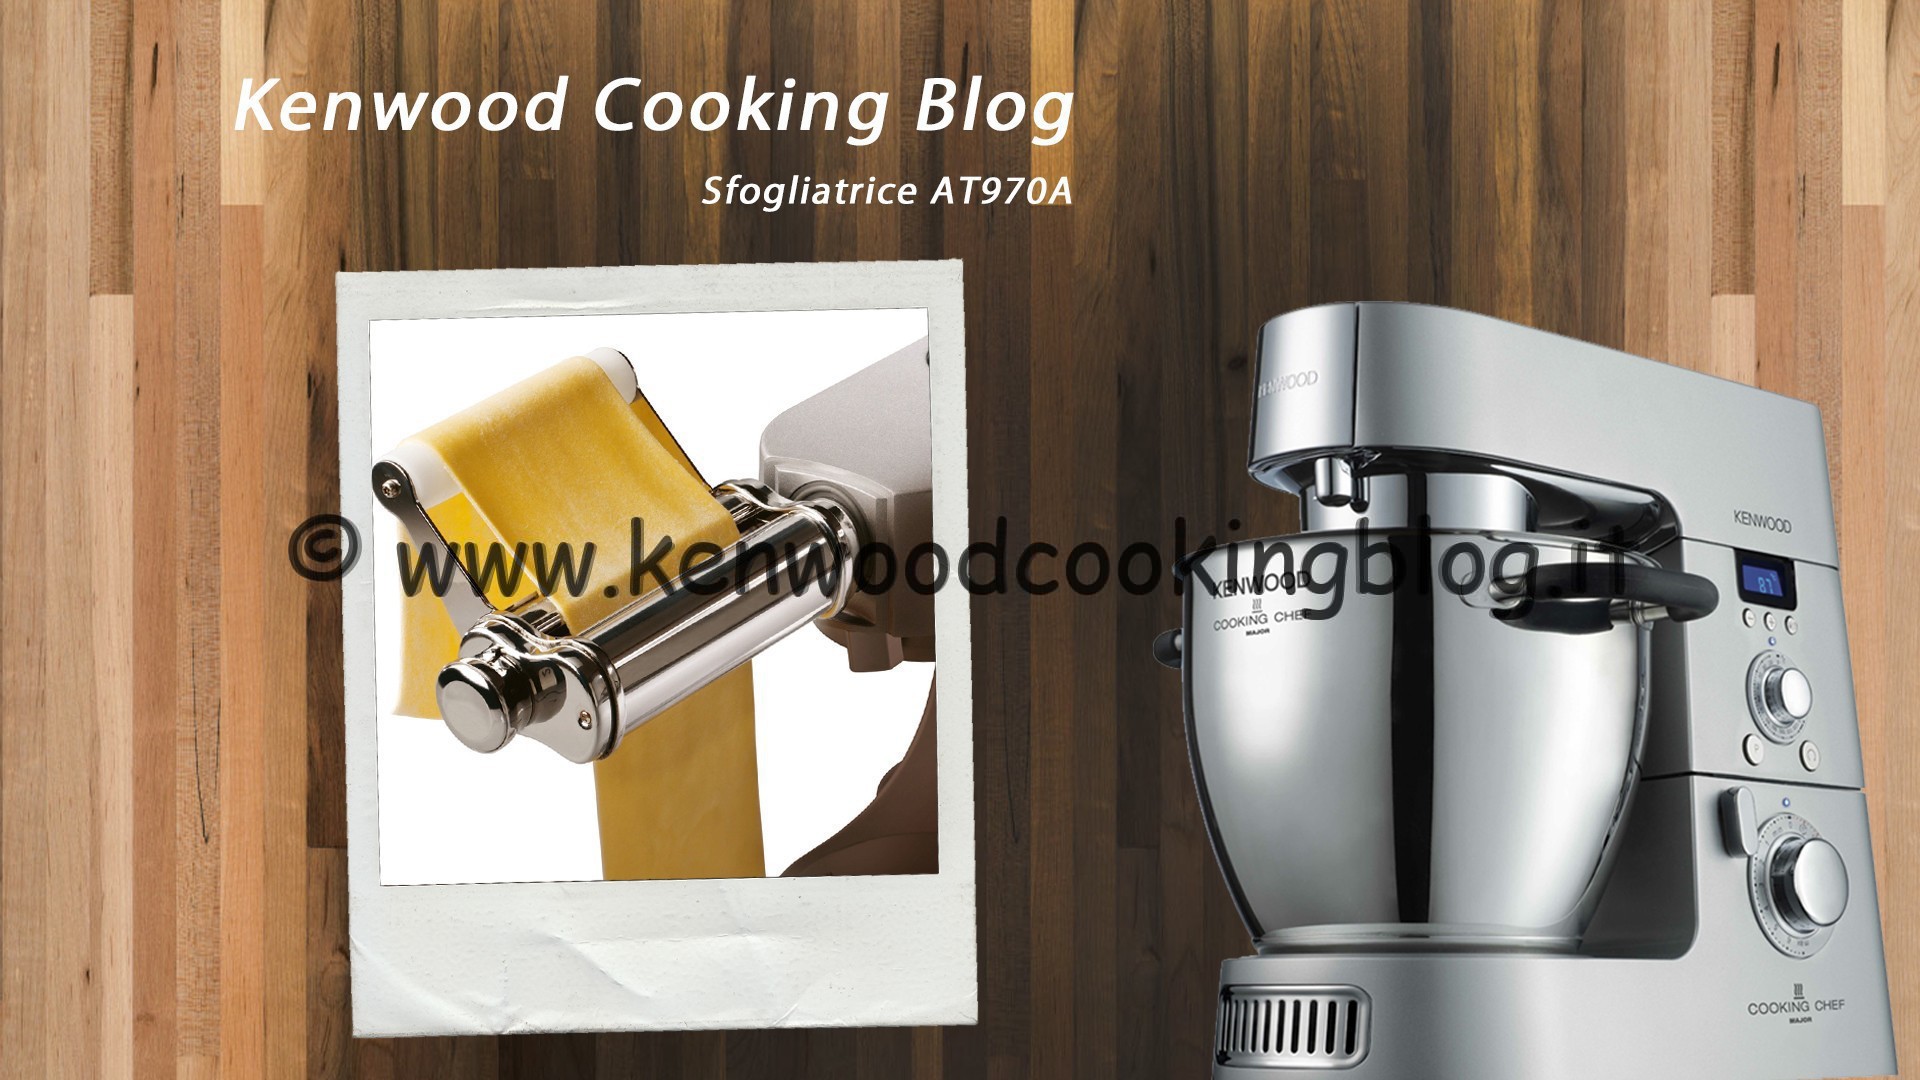 Video Sfogliatrice AT970A per Kenwood Cooking Chef – Kenwood Cooking Blog